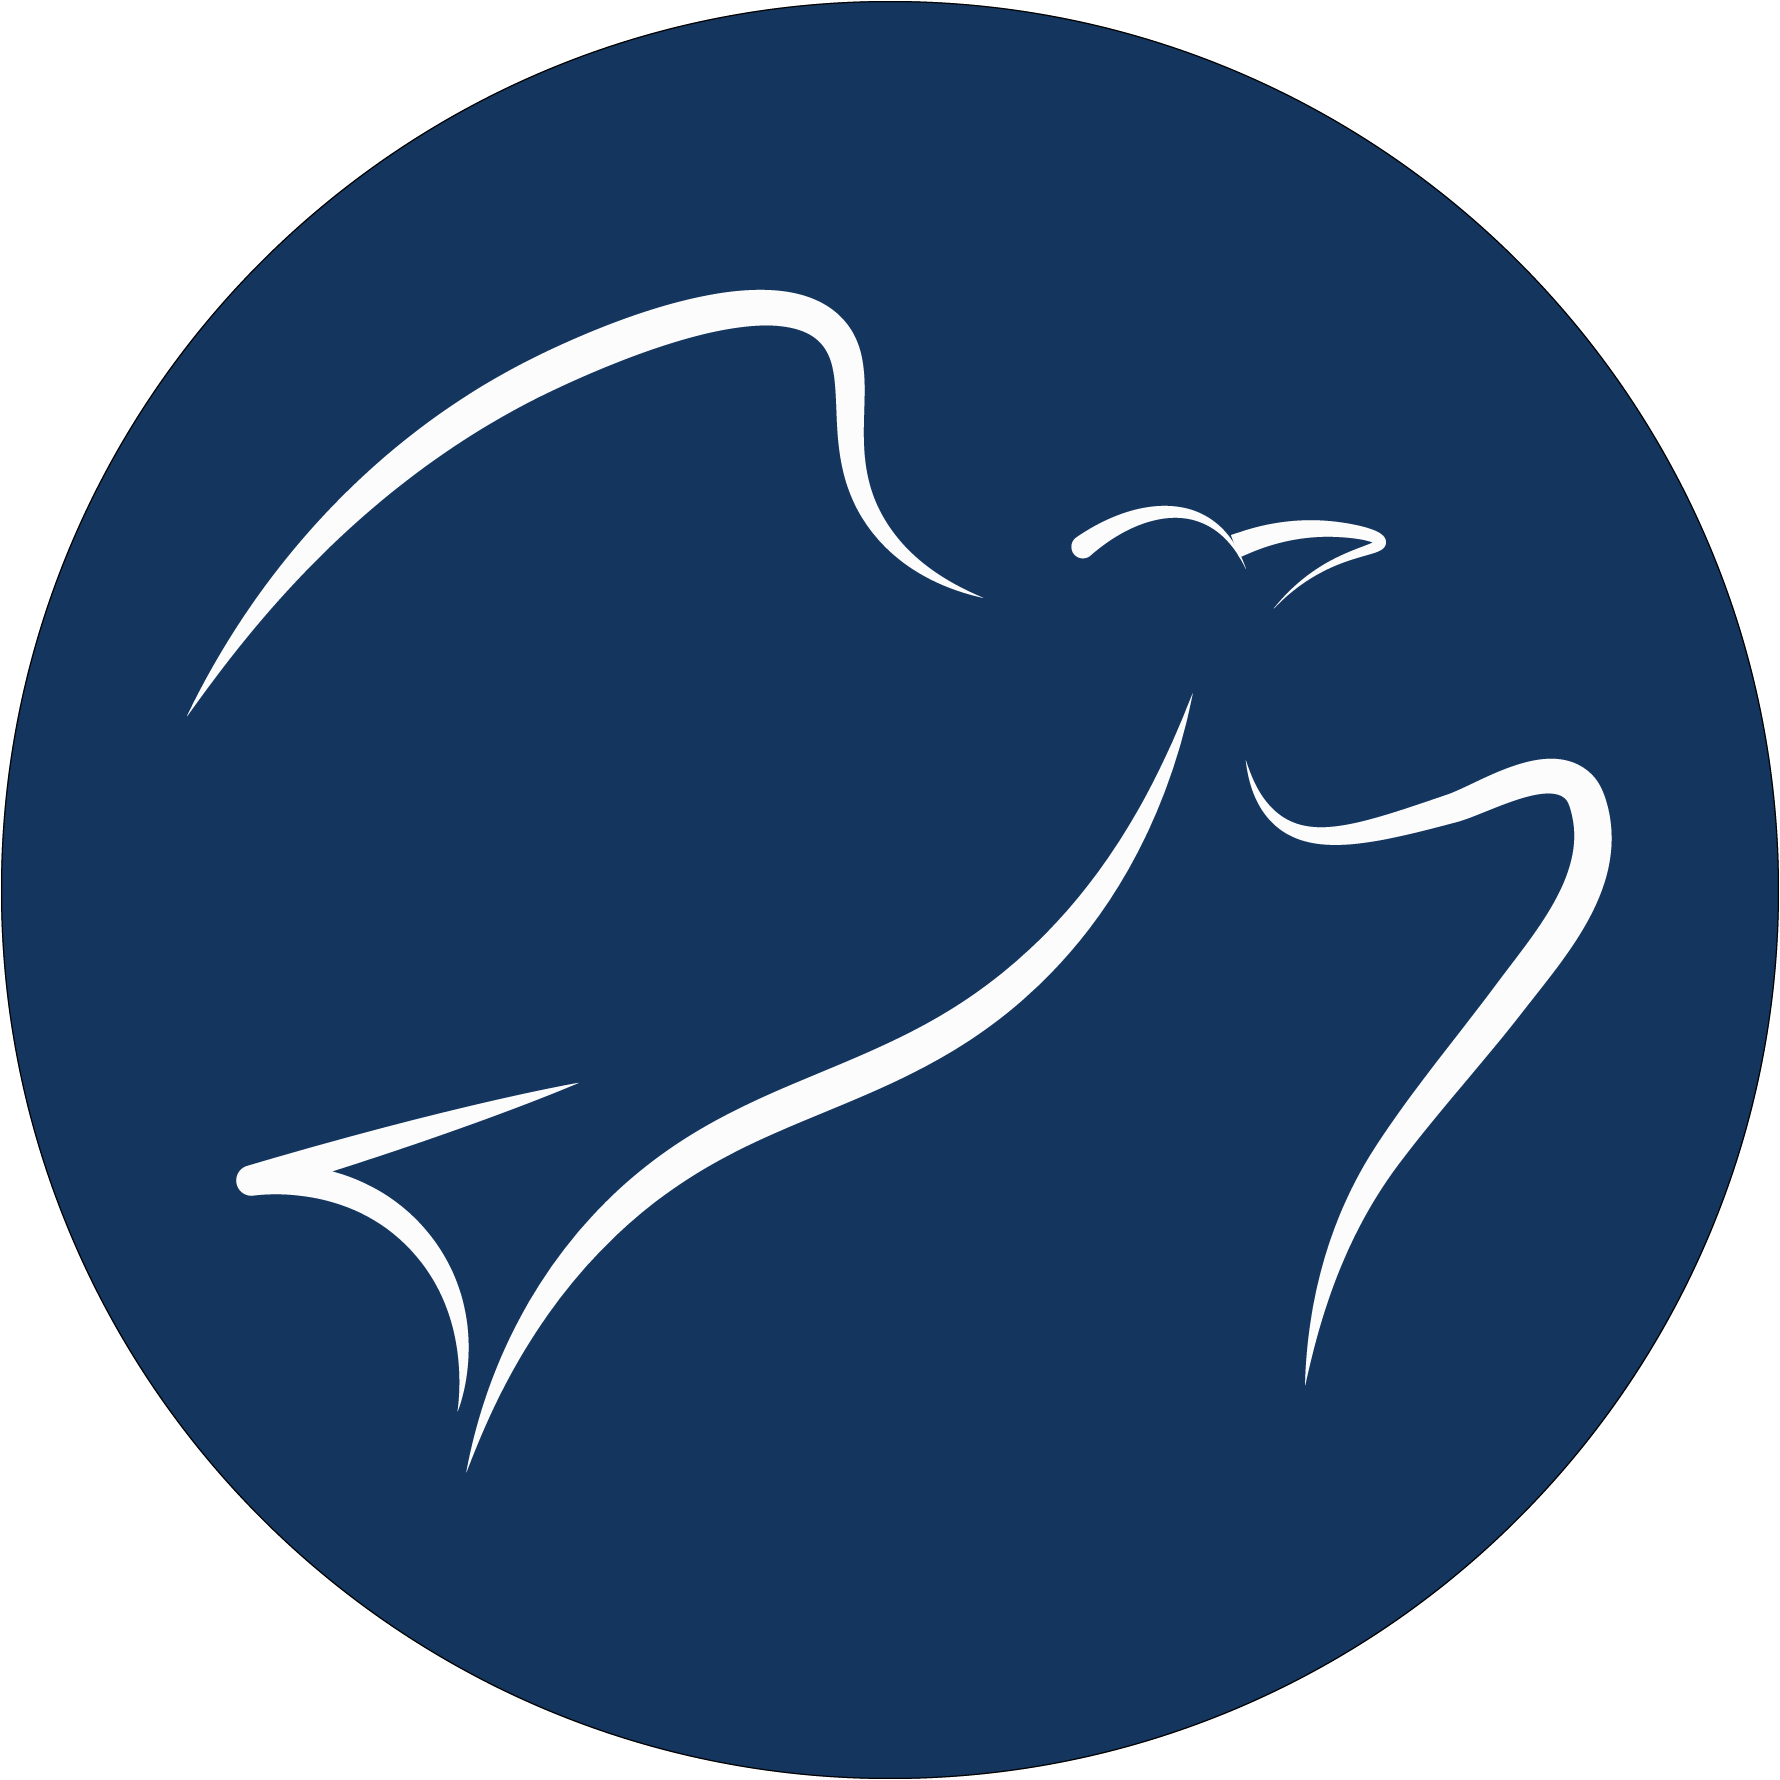 Made By Liberty white bird logo on blue background.